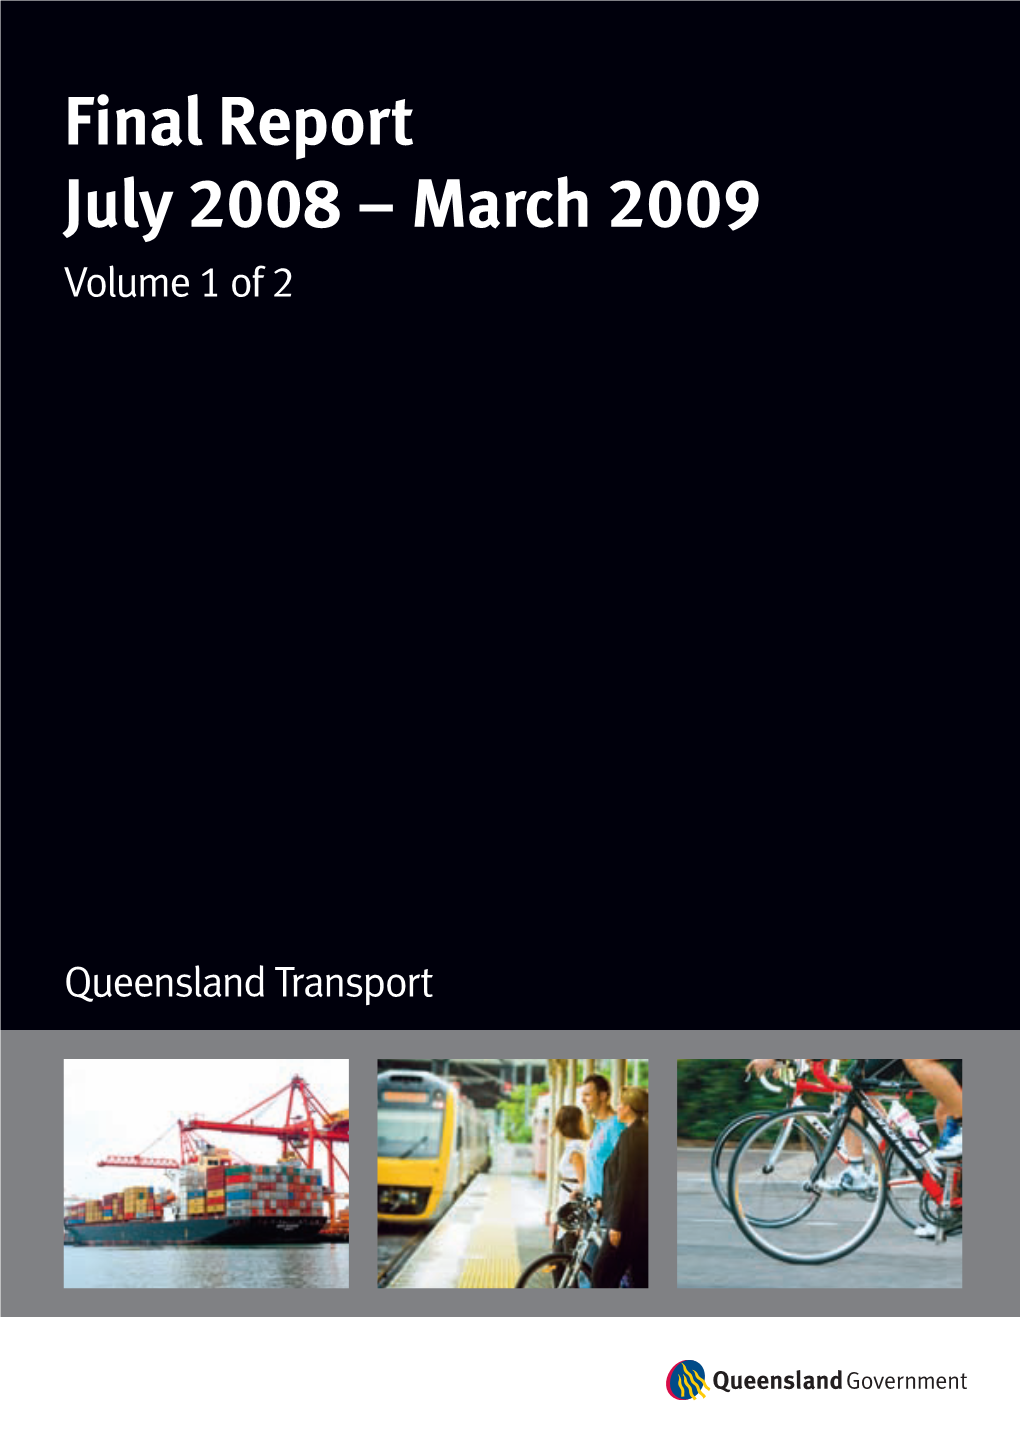 Final Report July 2008 – March 2009 Volume 1 of 2